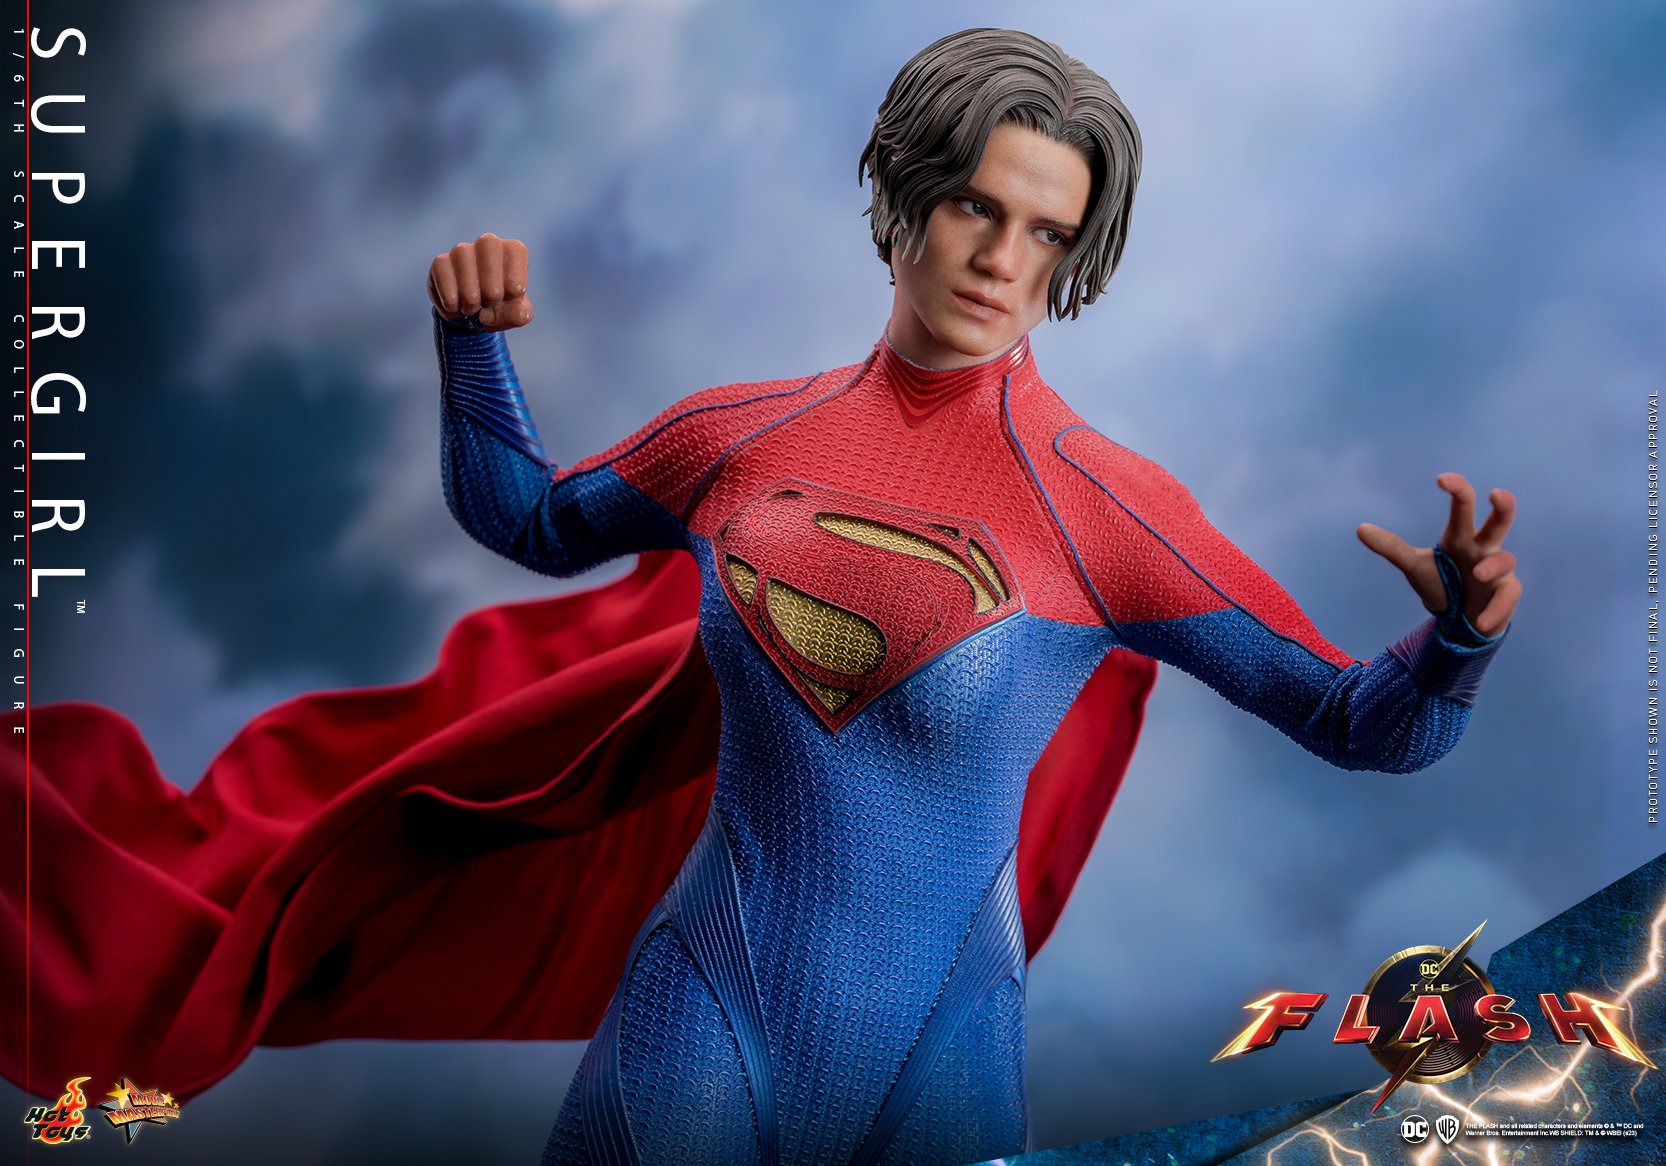 Hot Toys Reveals Its New THE FLASH Action Figure of Supergirl — GeekTyrant